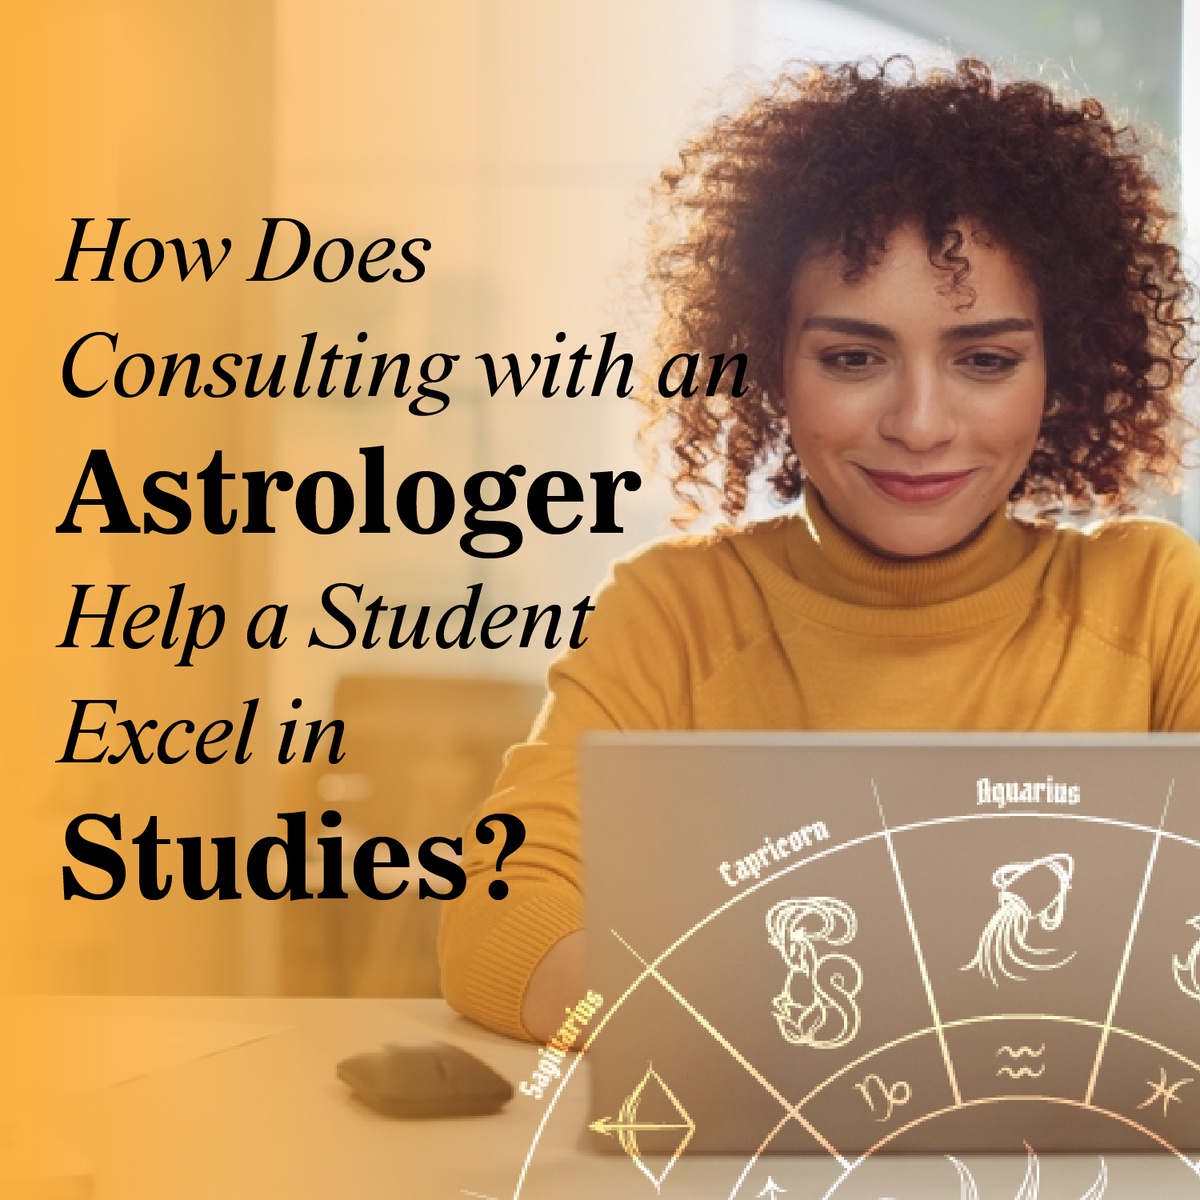 How Does Consulting with an Astrologer Help a Student Excel in Studies?